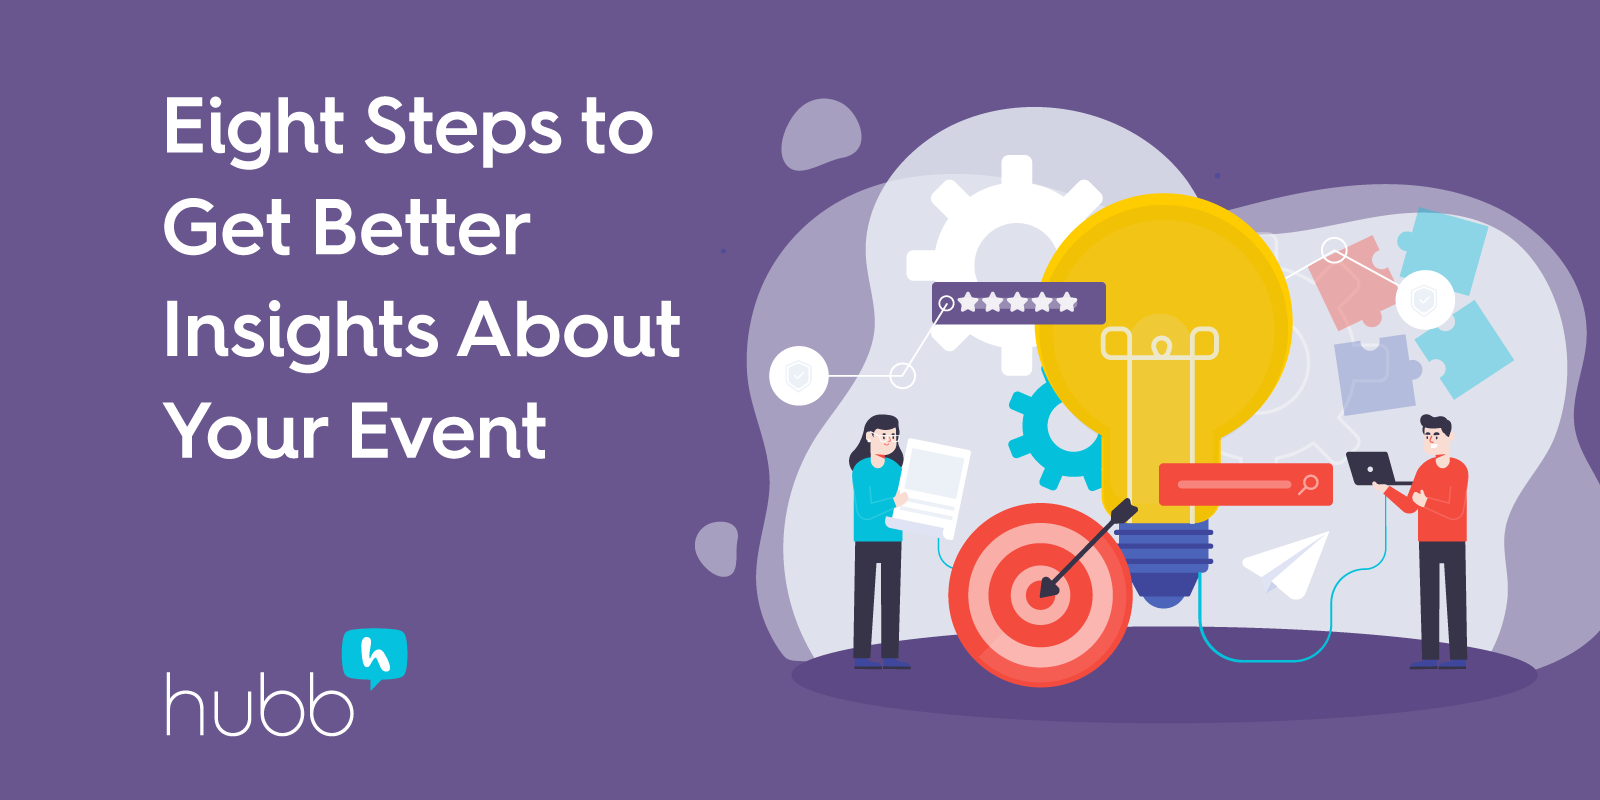 Eight Steps to Get Better Insights About Your Event